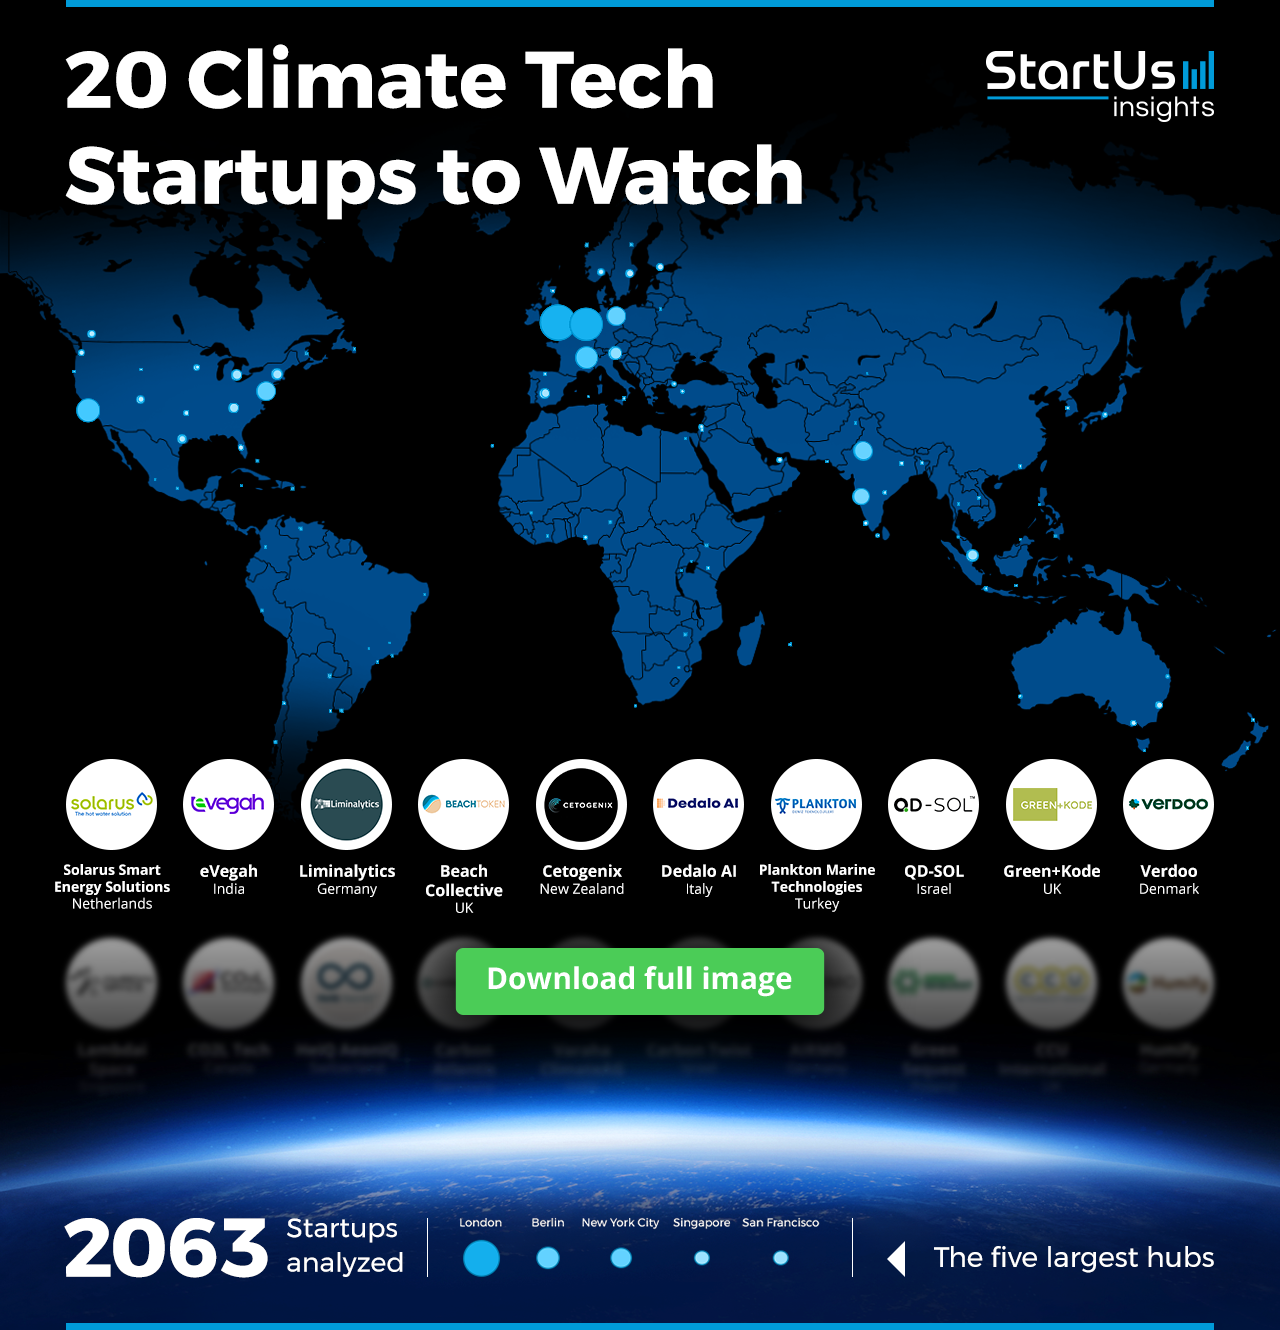 Climate-Tech-Startups-to-Watch-Heat-Map-Blurred-StartUs-Insights-noresize